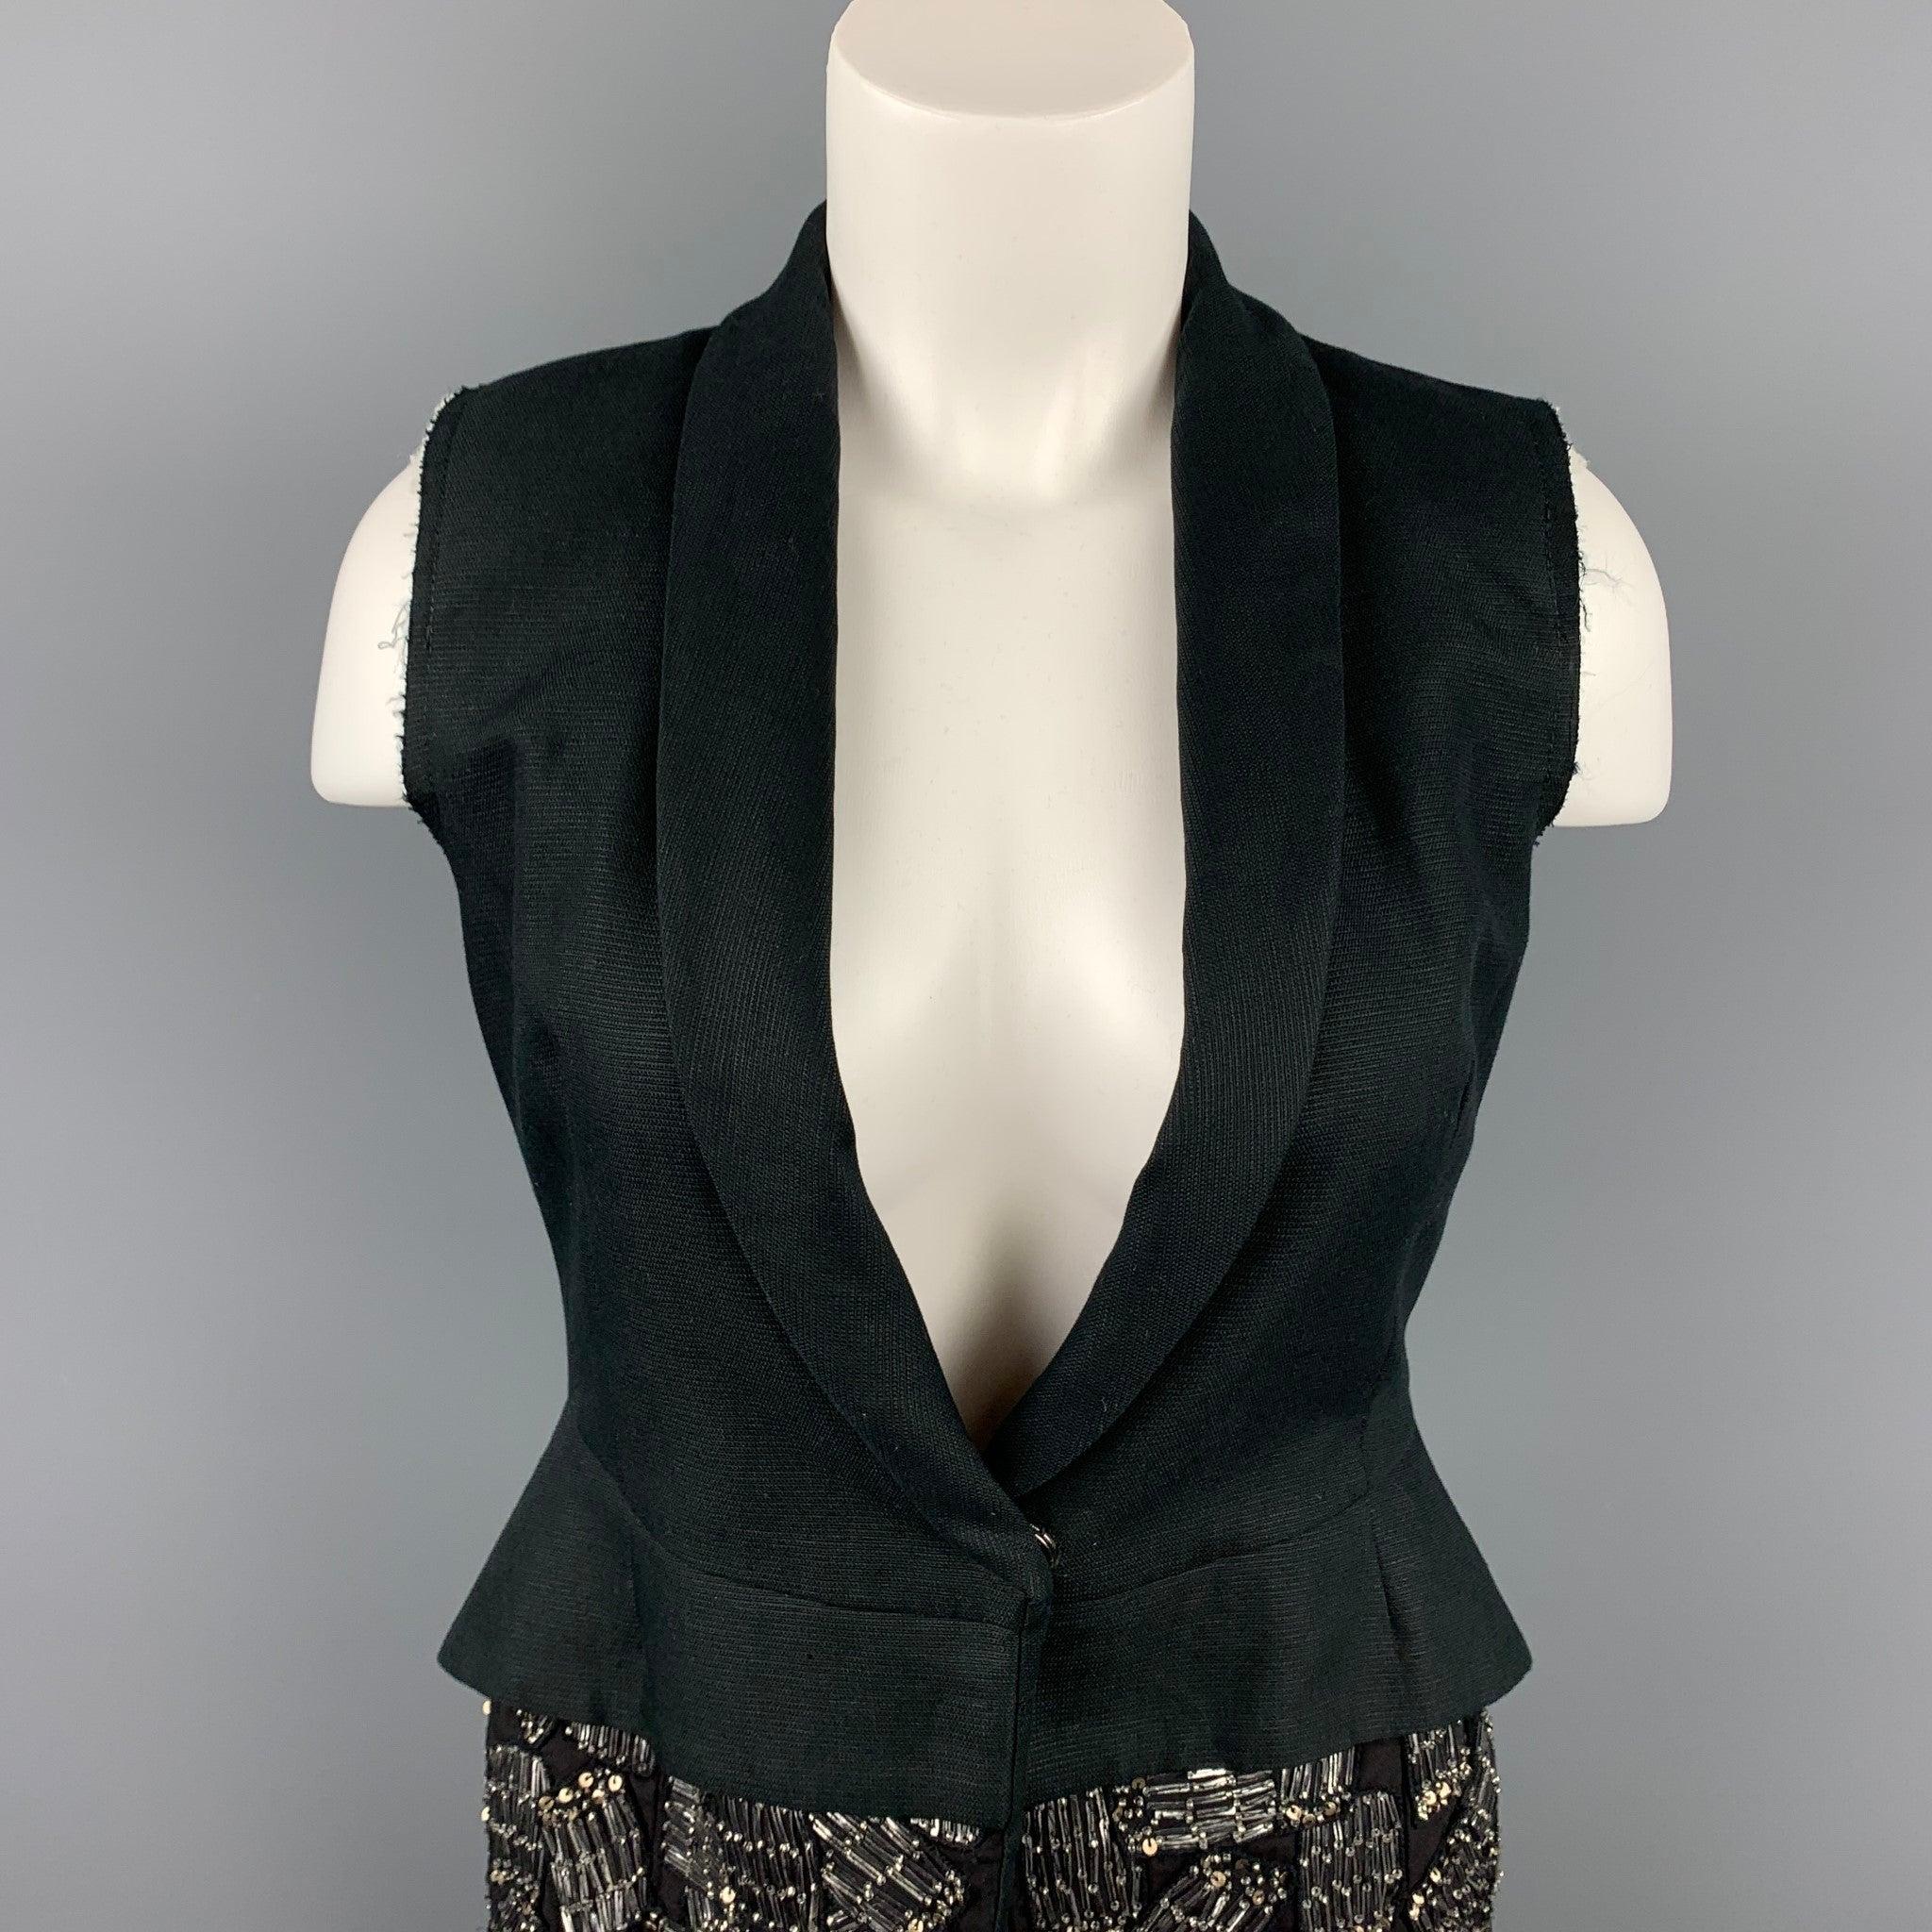 DRIES VAN NOTEN vest comes in a black cotton / linen with a beaded trim design featuring a full liner, shawl collar, and a single snap button closure.
Very Good
Pre-Owned Condition. 

Marked:   36 

Measurements: 
 
Shoulder: 13 inches  Bust: 32